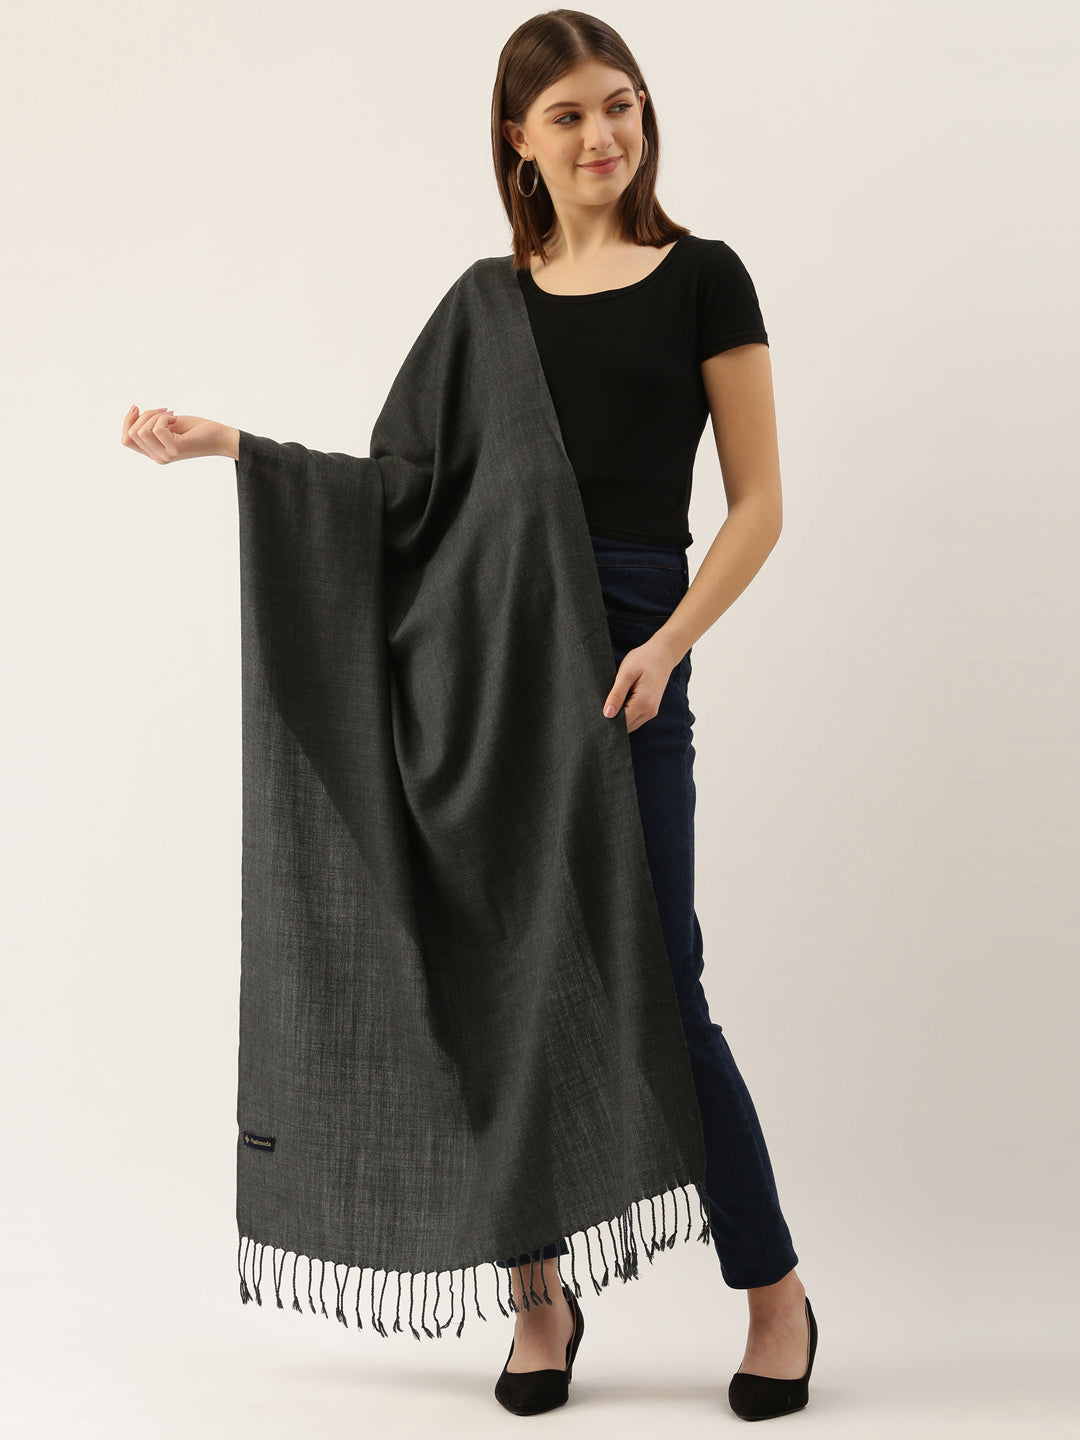 Women’s Grey Solid Stole (28x80 Inches)